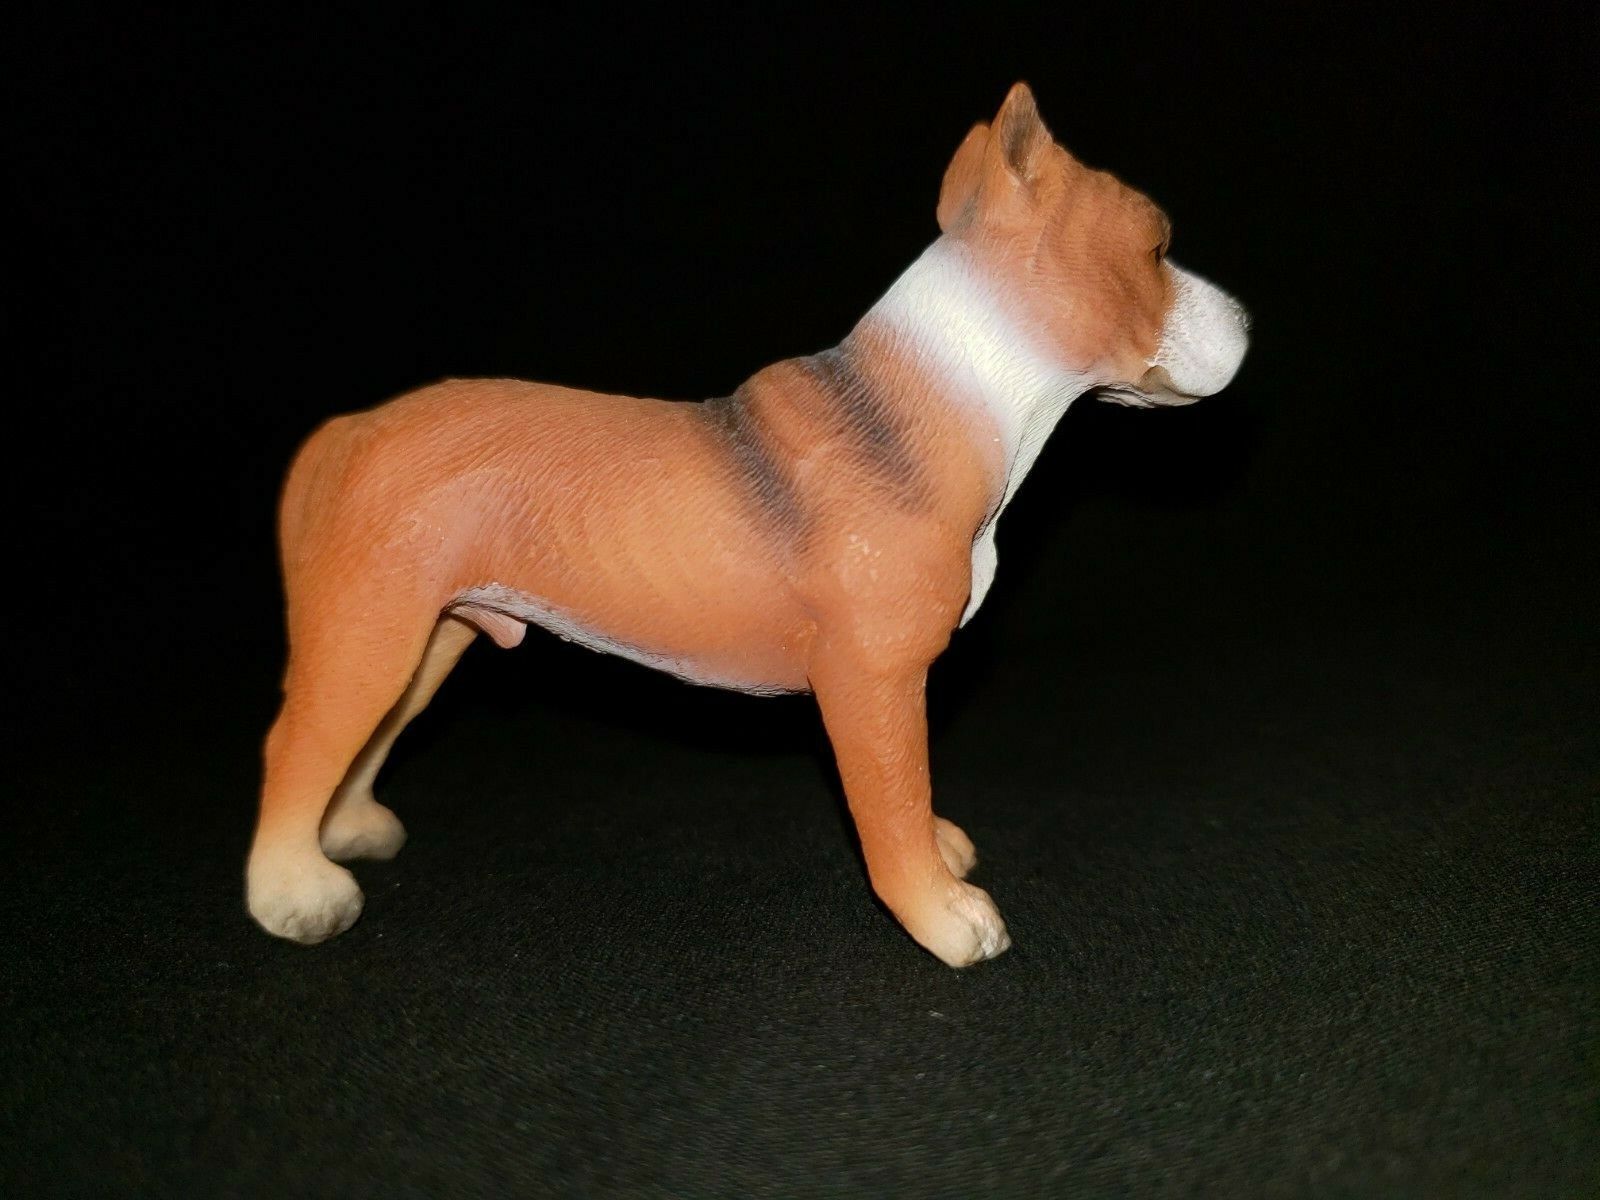 YTC American Pitbull Terrier Dog - Collectible Figurine Great Condition